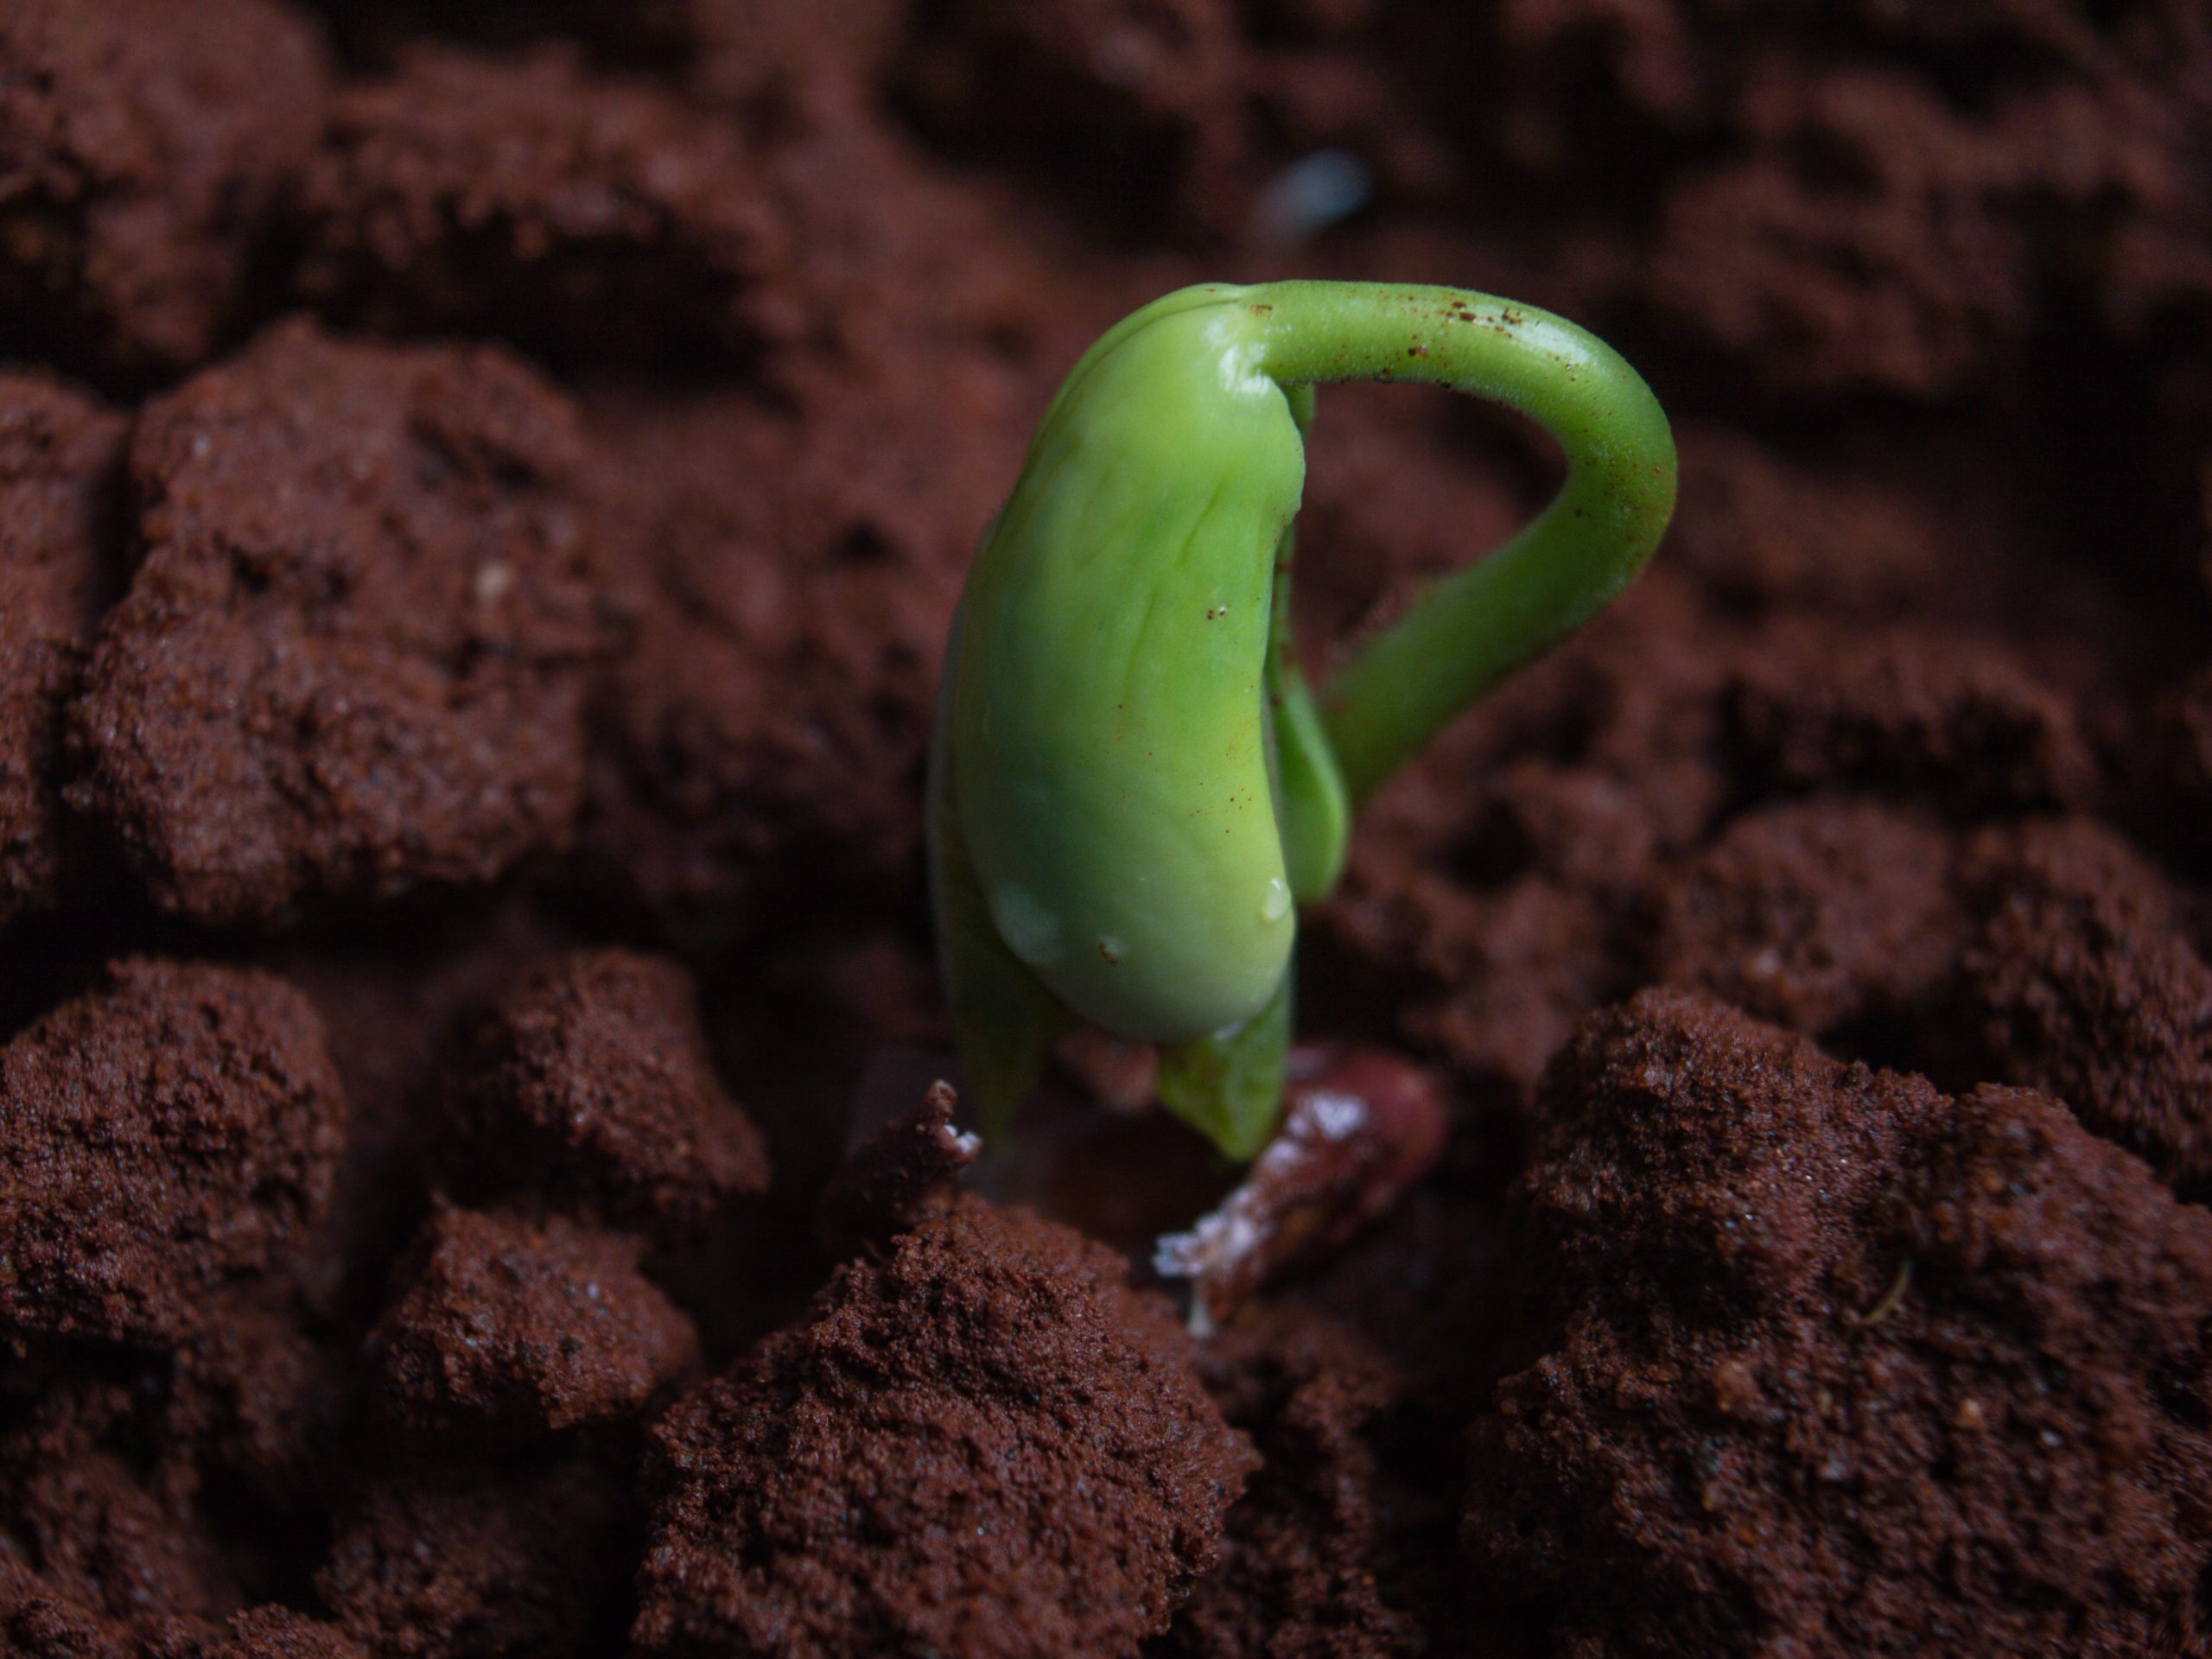 The picture shows a seedling, to represent the founding of Sensible Financial and their emphasis on family economics.